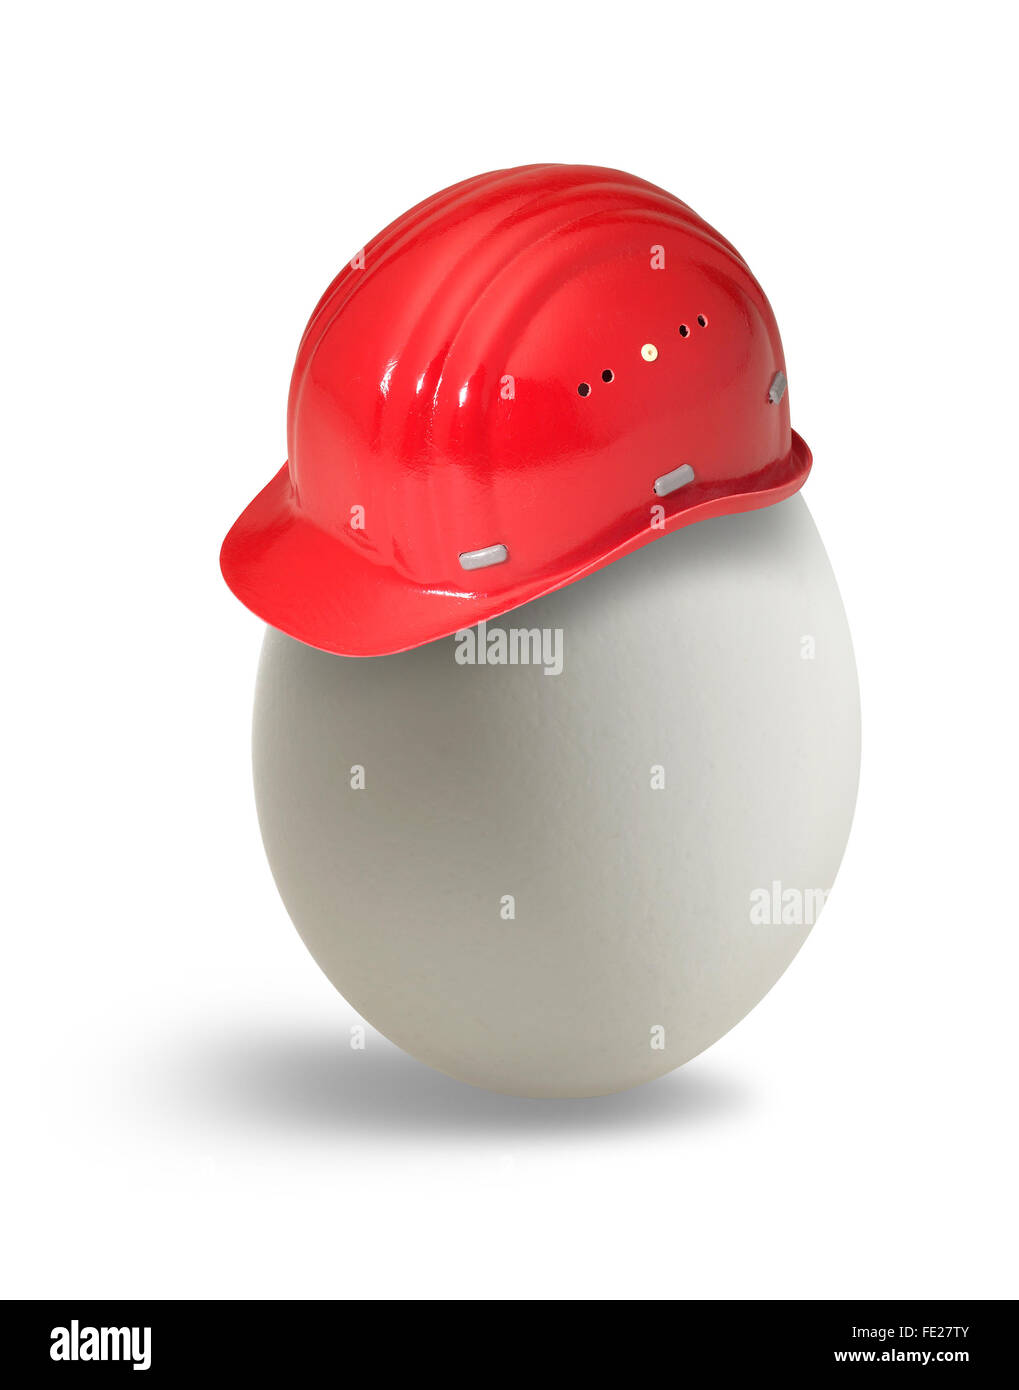 egg with red hardhat in light back Stock Photo